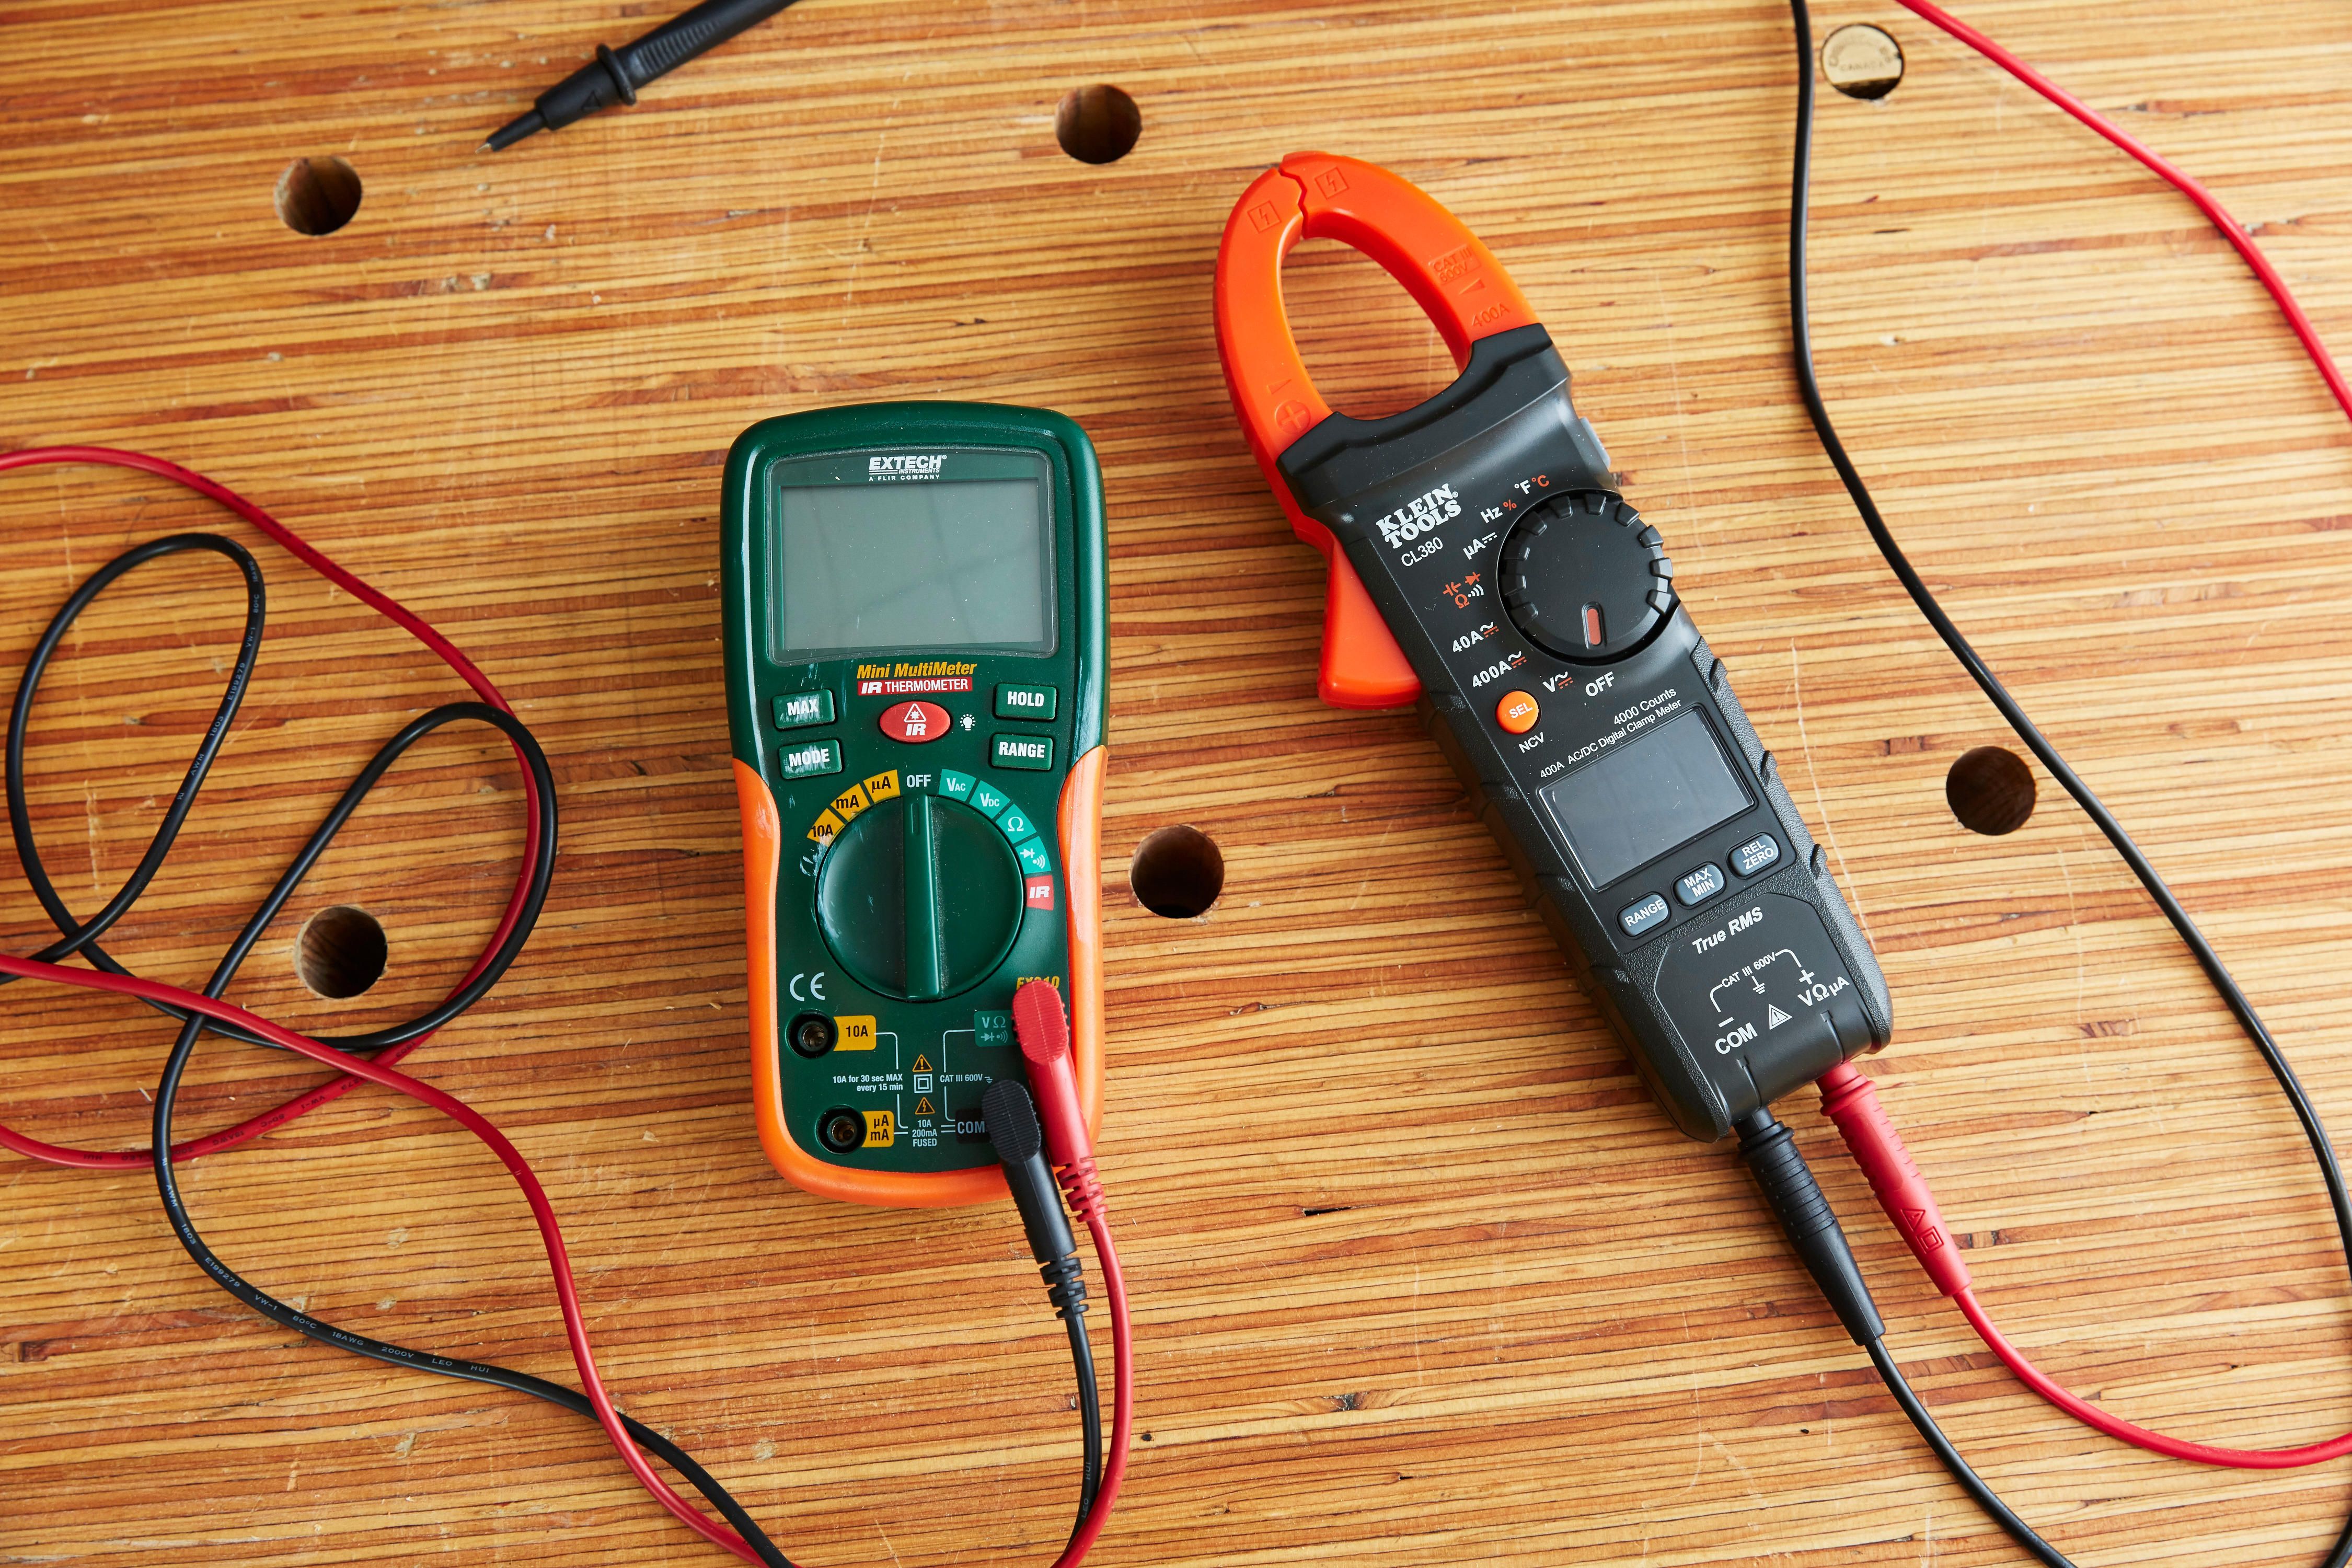 What Does a Negative Voltage Mean on a Multimeter?